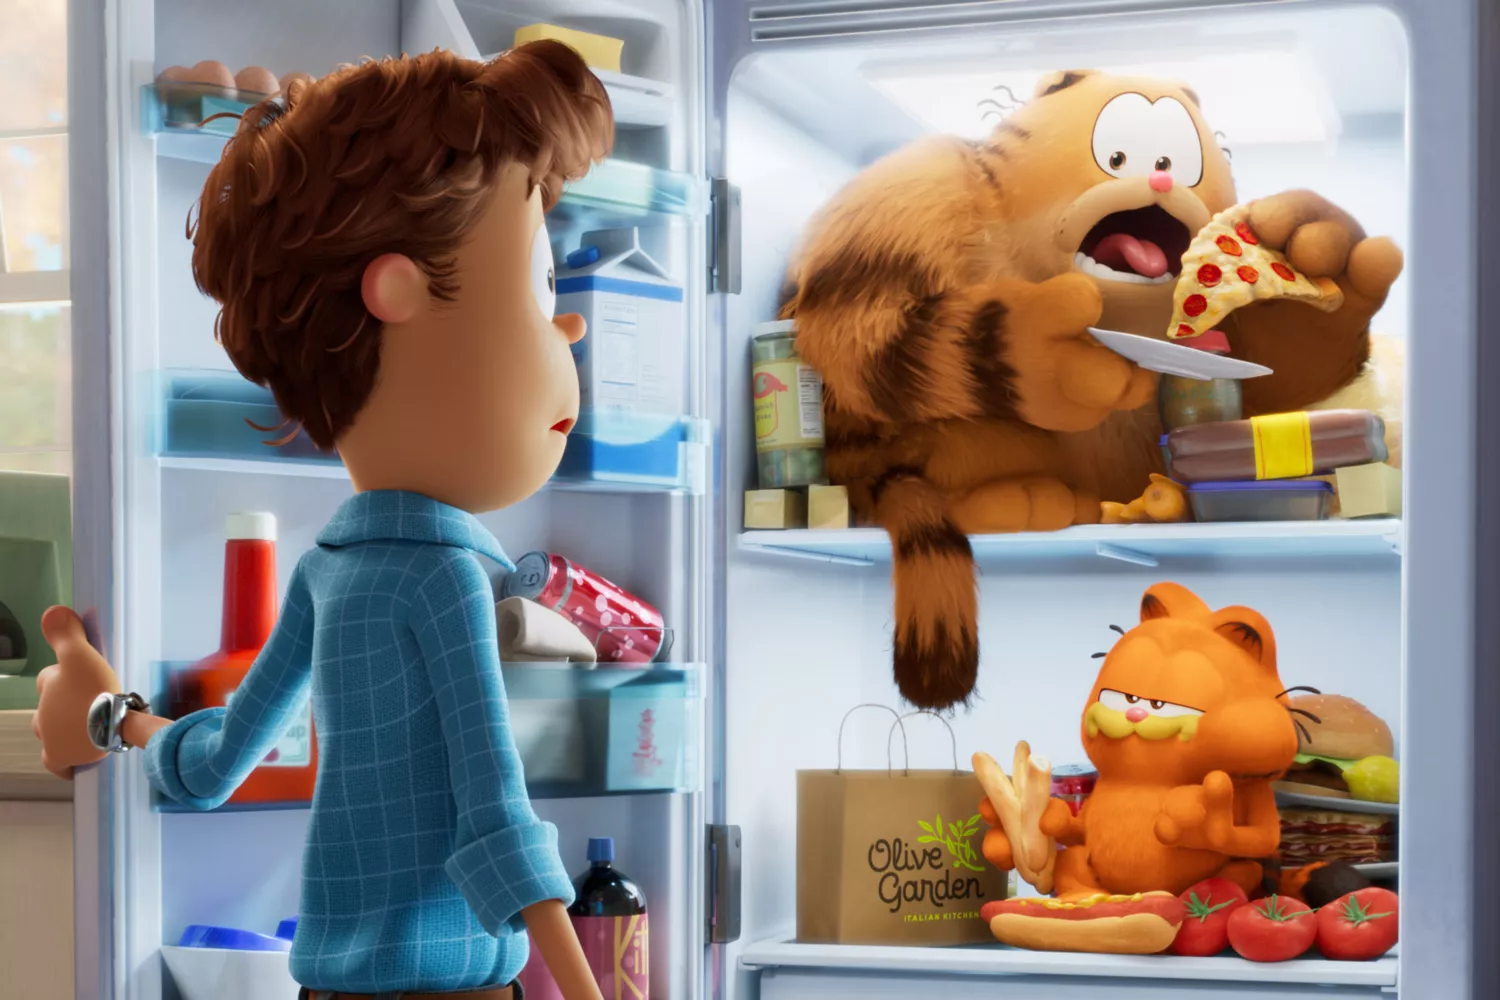 Get Ready for Fun: 'The Garfield Movie' Starring Chris Pratt Hits Theaters on May 24!